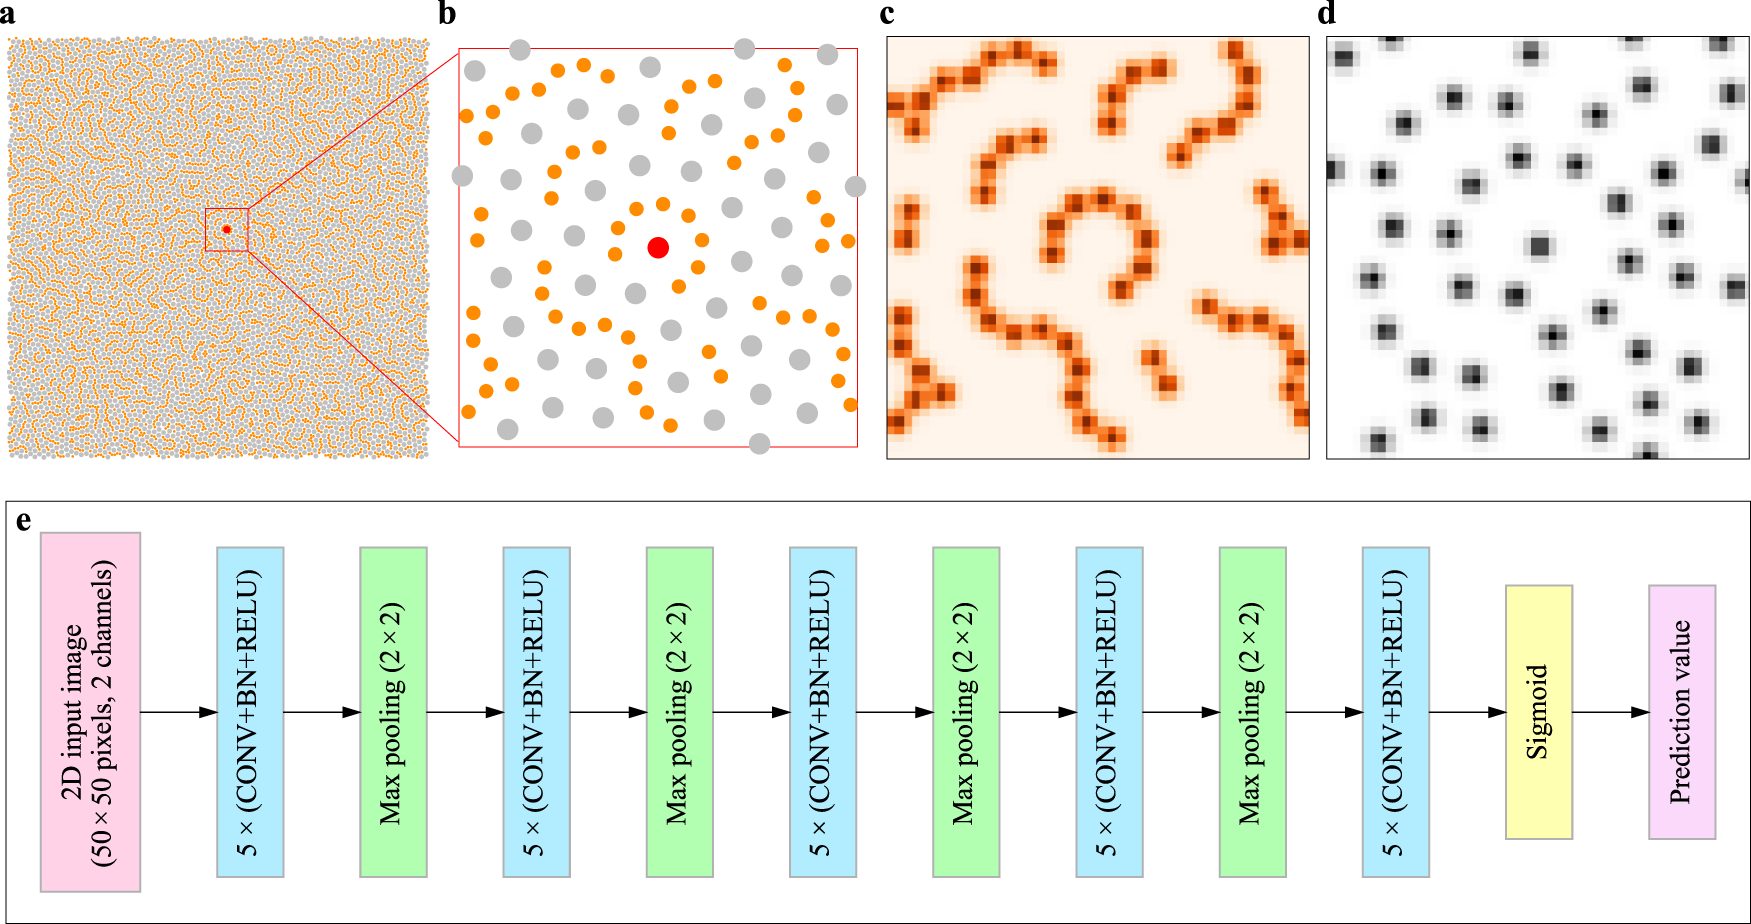 Predicting orientation-dependent plastic susceptibility from static  structure in amorphous solids via deep learning | Nature Communications